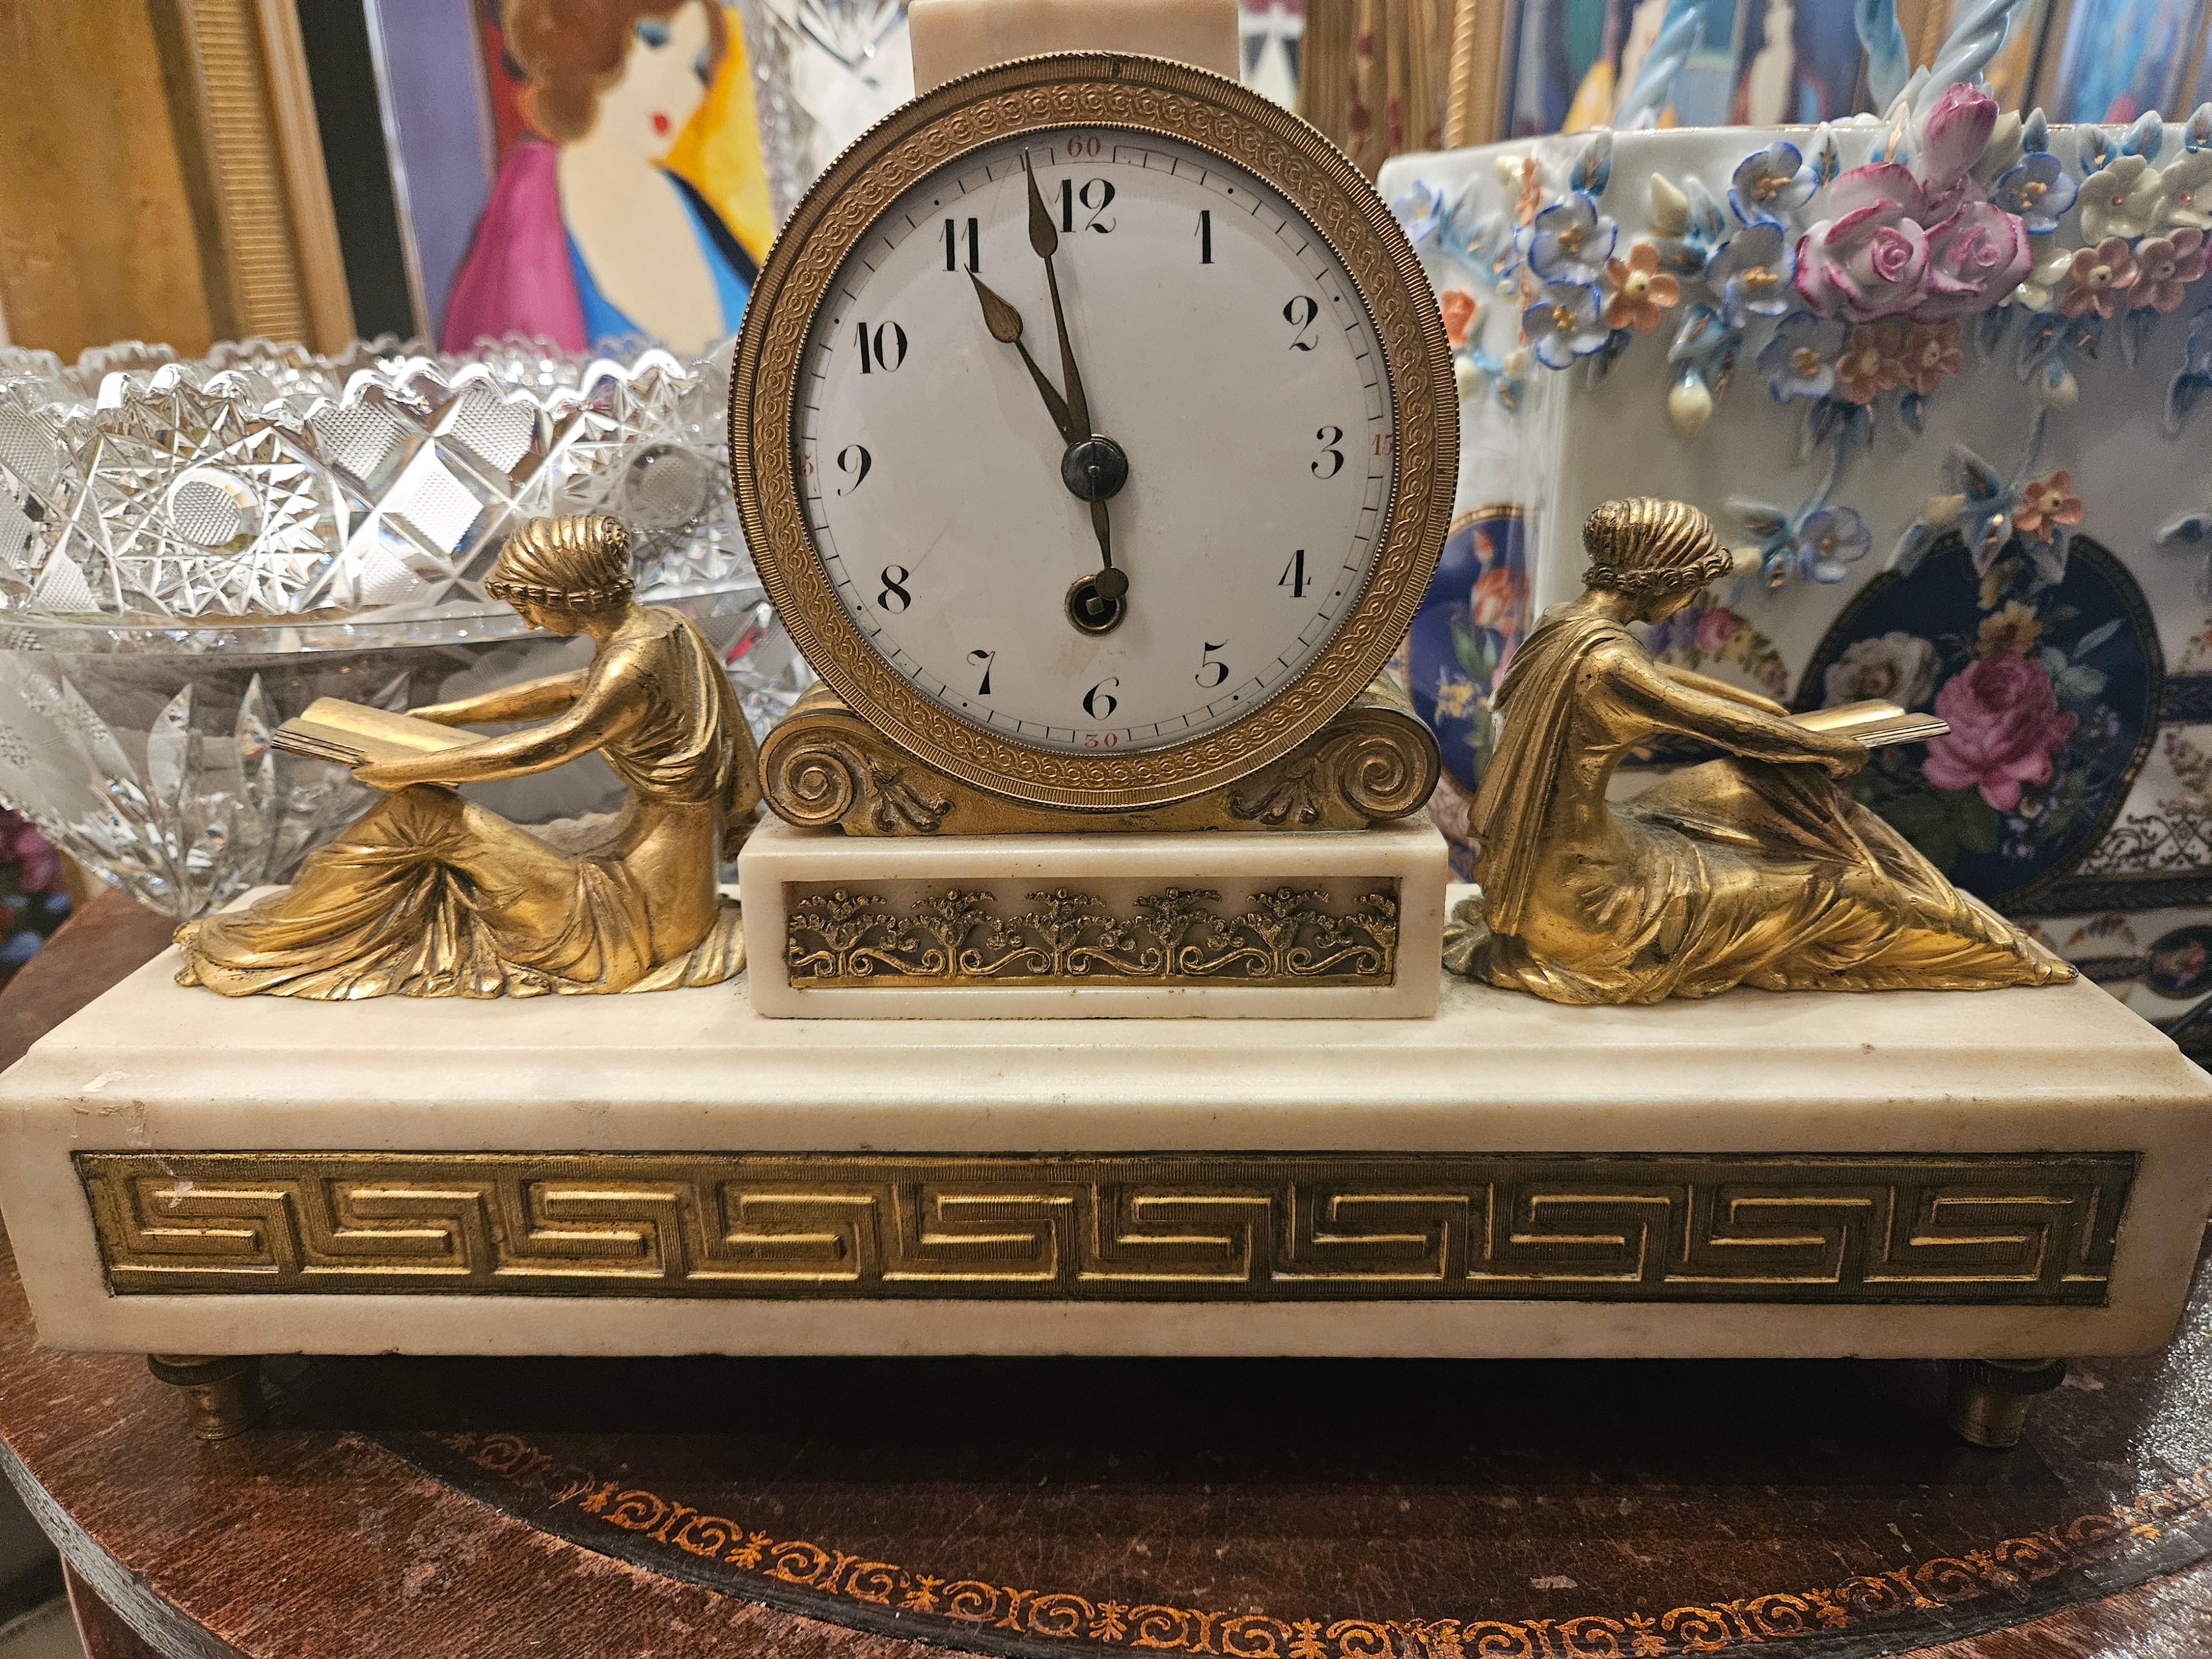 A Magnificent 18th Century English Gilt Bronze and White Marble Clock. Clock is Beautifully Comprised with a Bird Form Finial over the Circular dial with Arabic Numerals, flanked by Classical Maidens reading, the Base with inset Greek Key